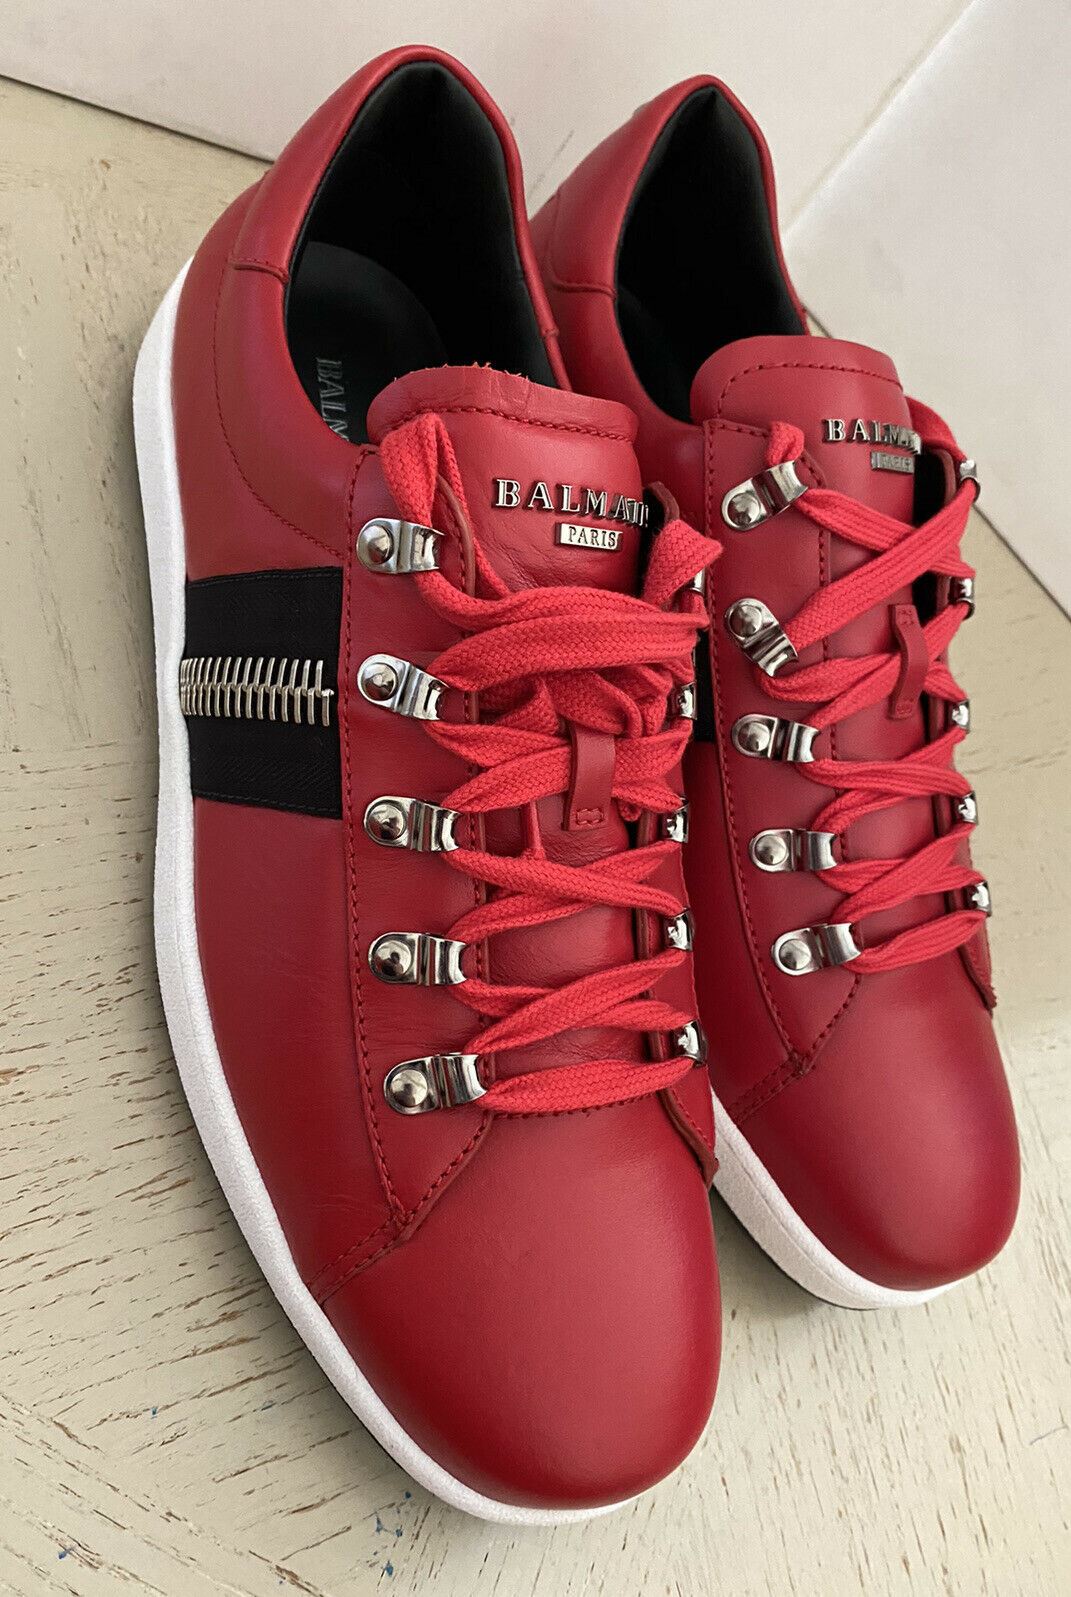 New $695 Balmain Lace-Up Low-Top Leather Sneakers Red 12 US/45 Eu